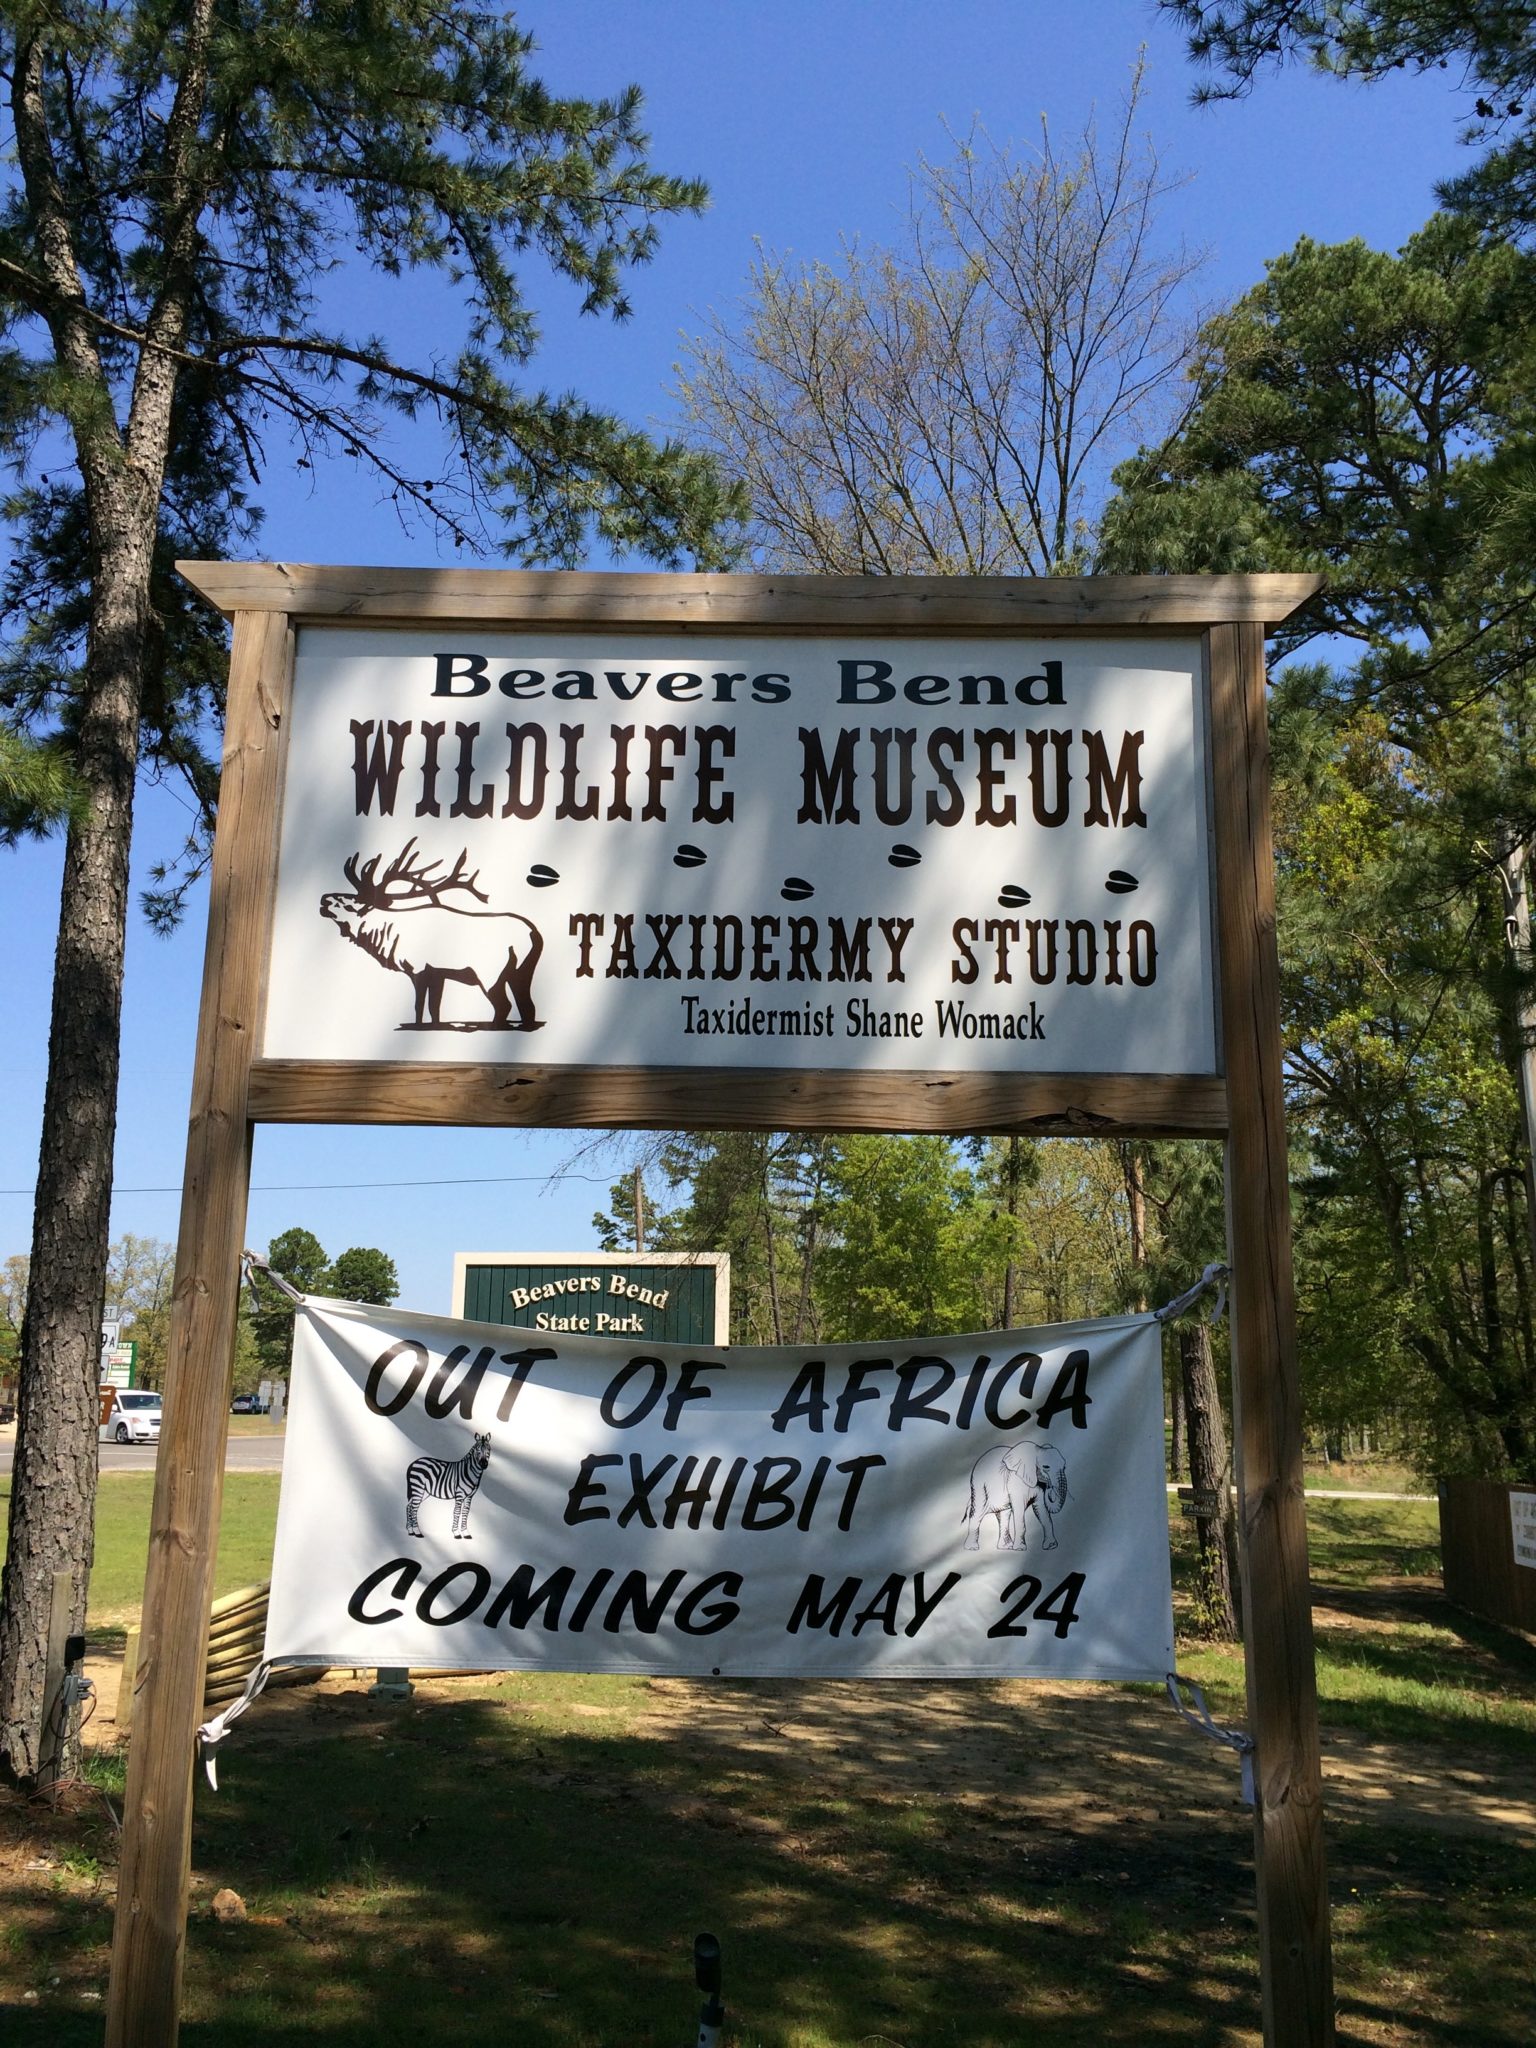 Visit the Beavers Bend Wildlife Museum and enjoy their large taxonomy collection.